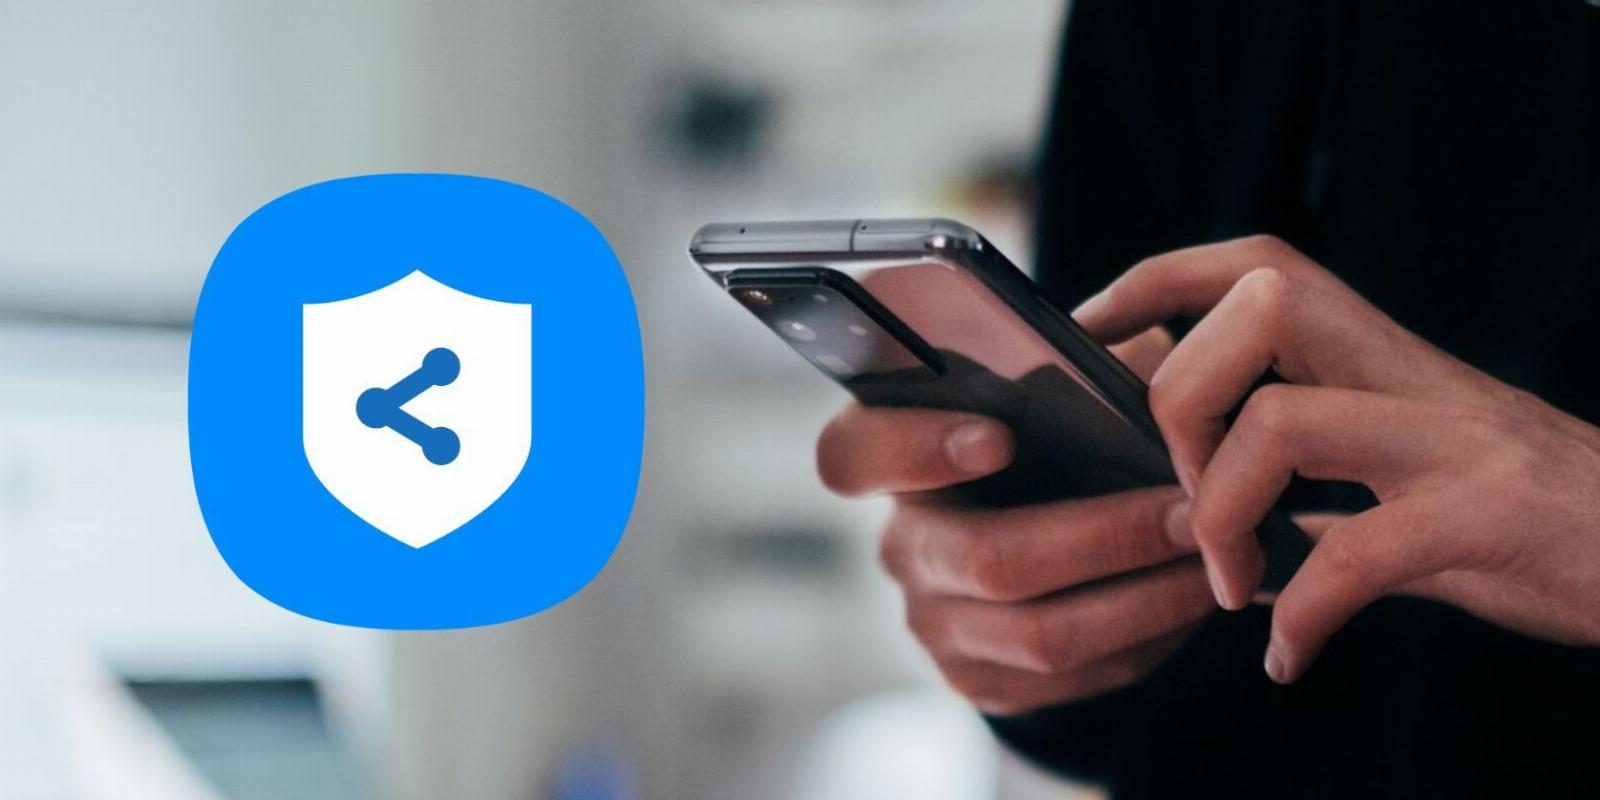 How to Use Private Share on Samsung Phones to Send Files Securely